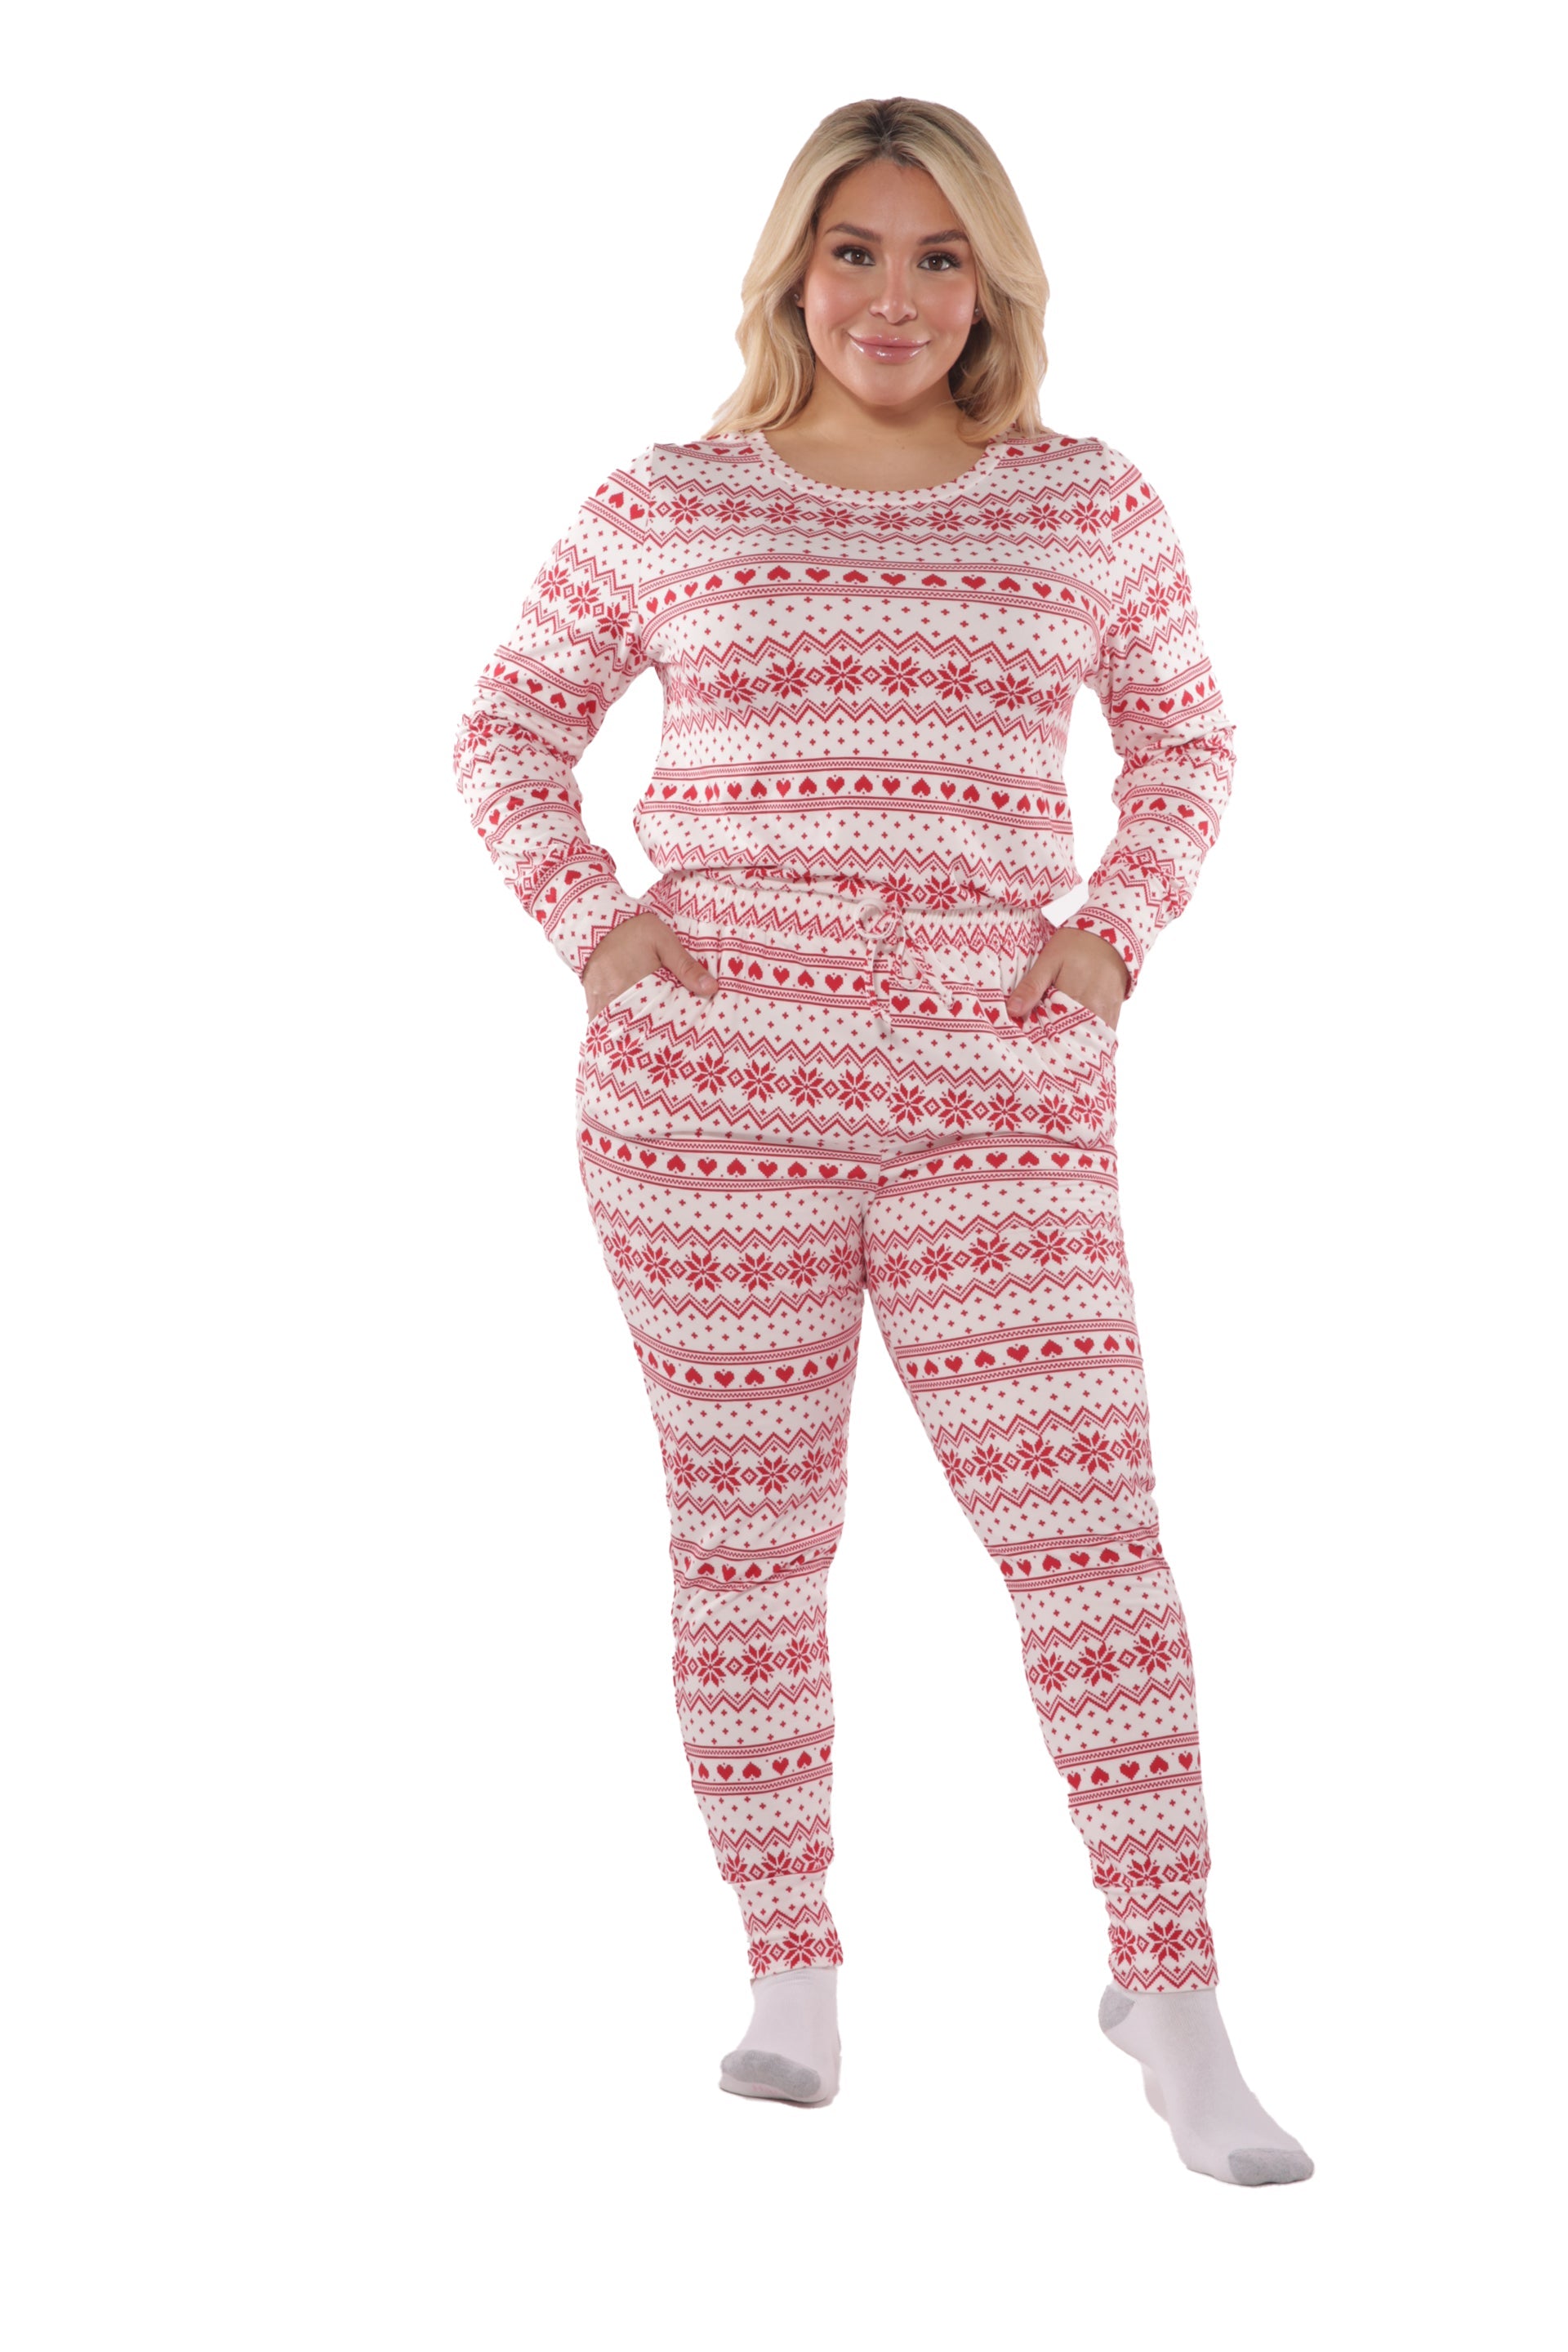 Wholesale Womens Plus Size Holiday Print Fleece Lined Long Sleeve Top & Sweatpants Pajama Set - White & Red